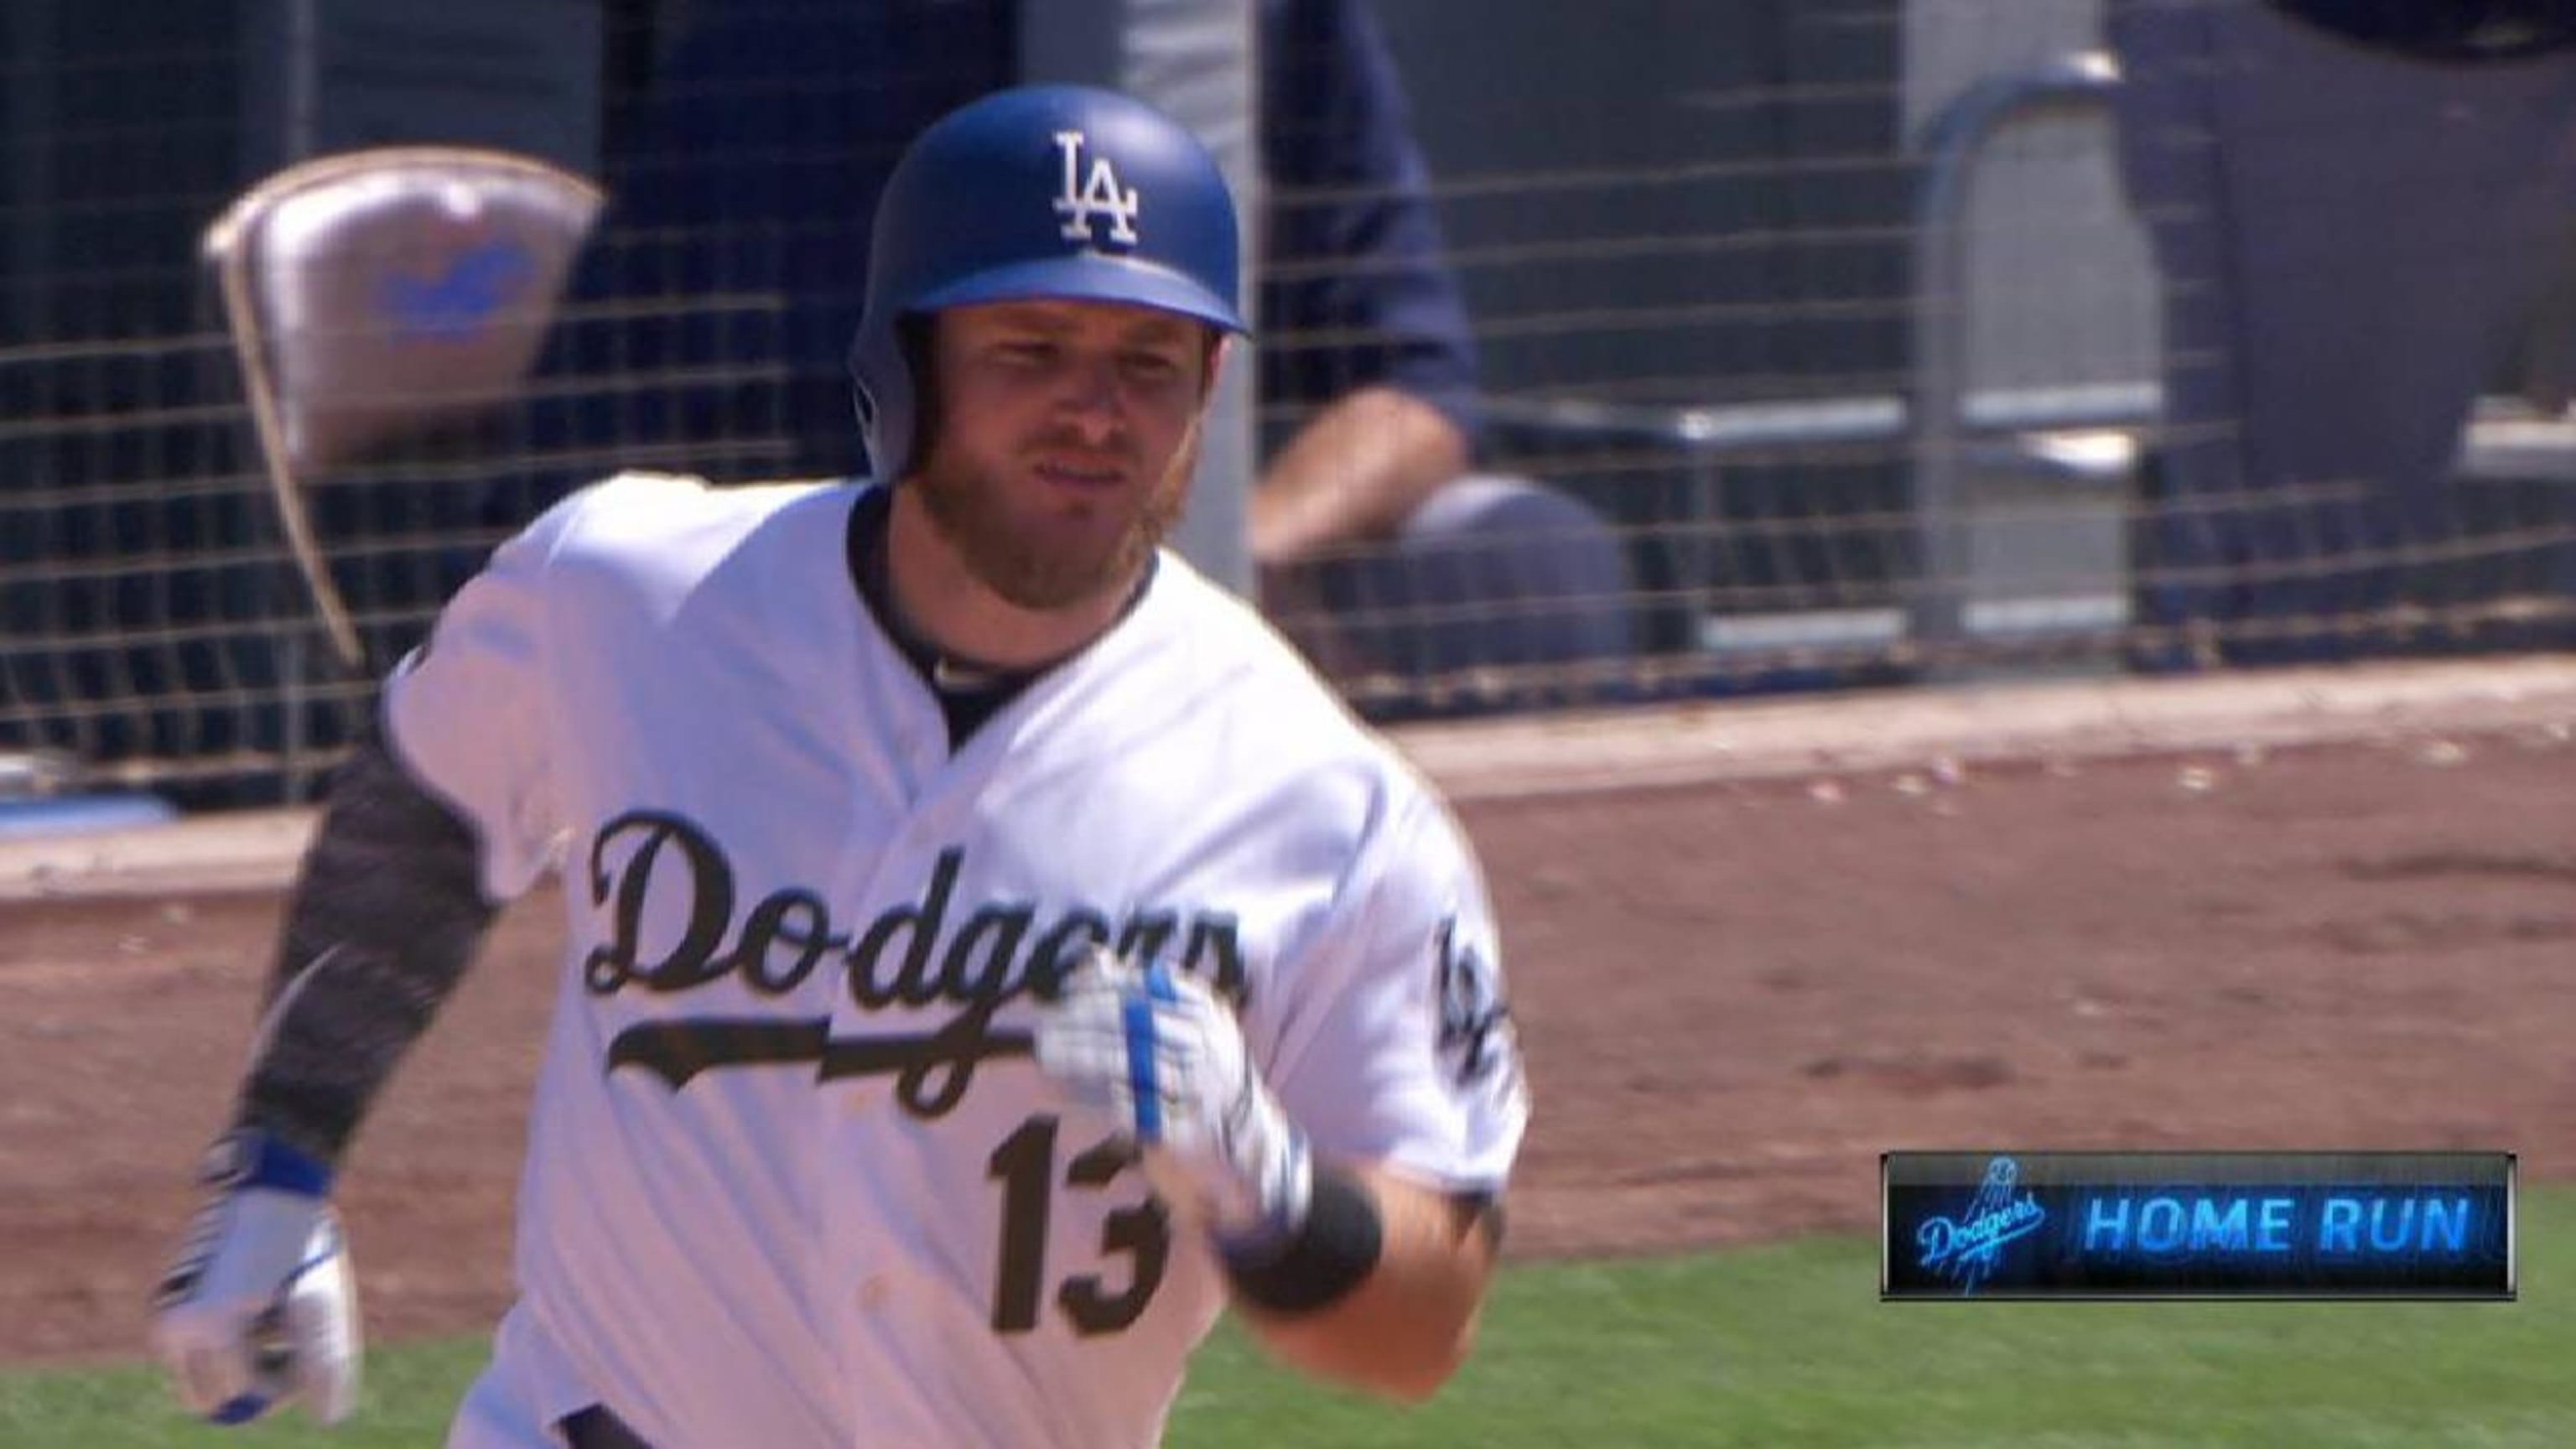 Dodgers News: Max Muncy on Leave From Team, Top Slugging Prospect